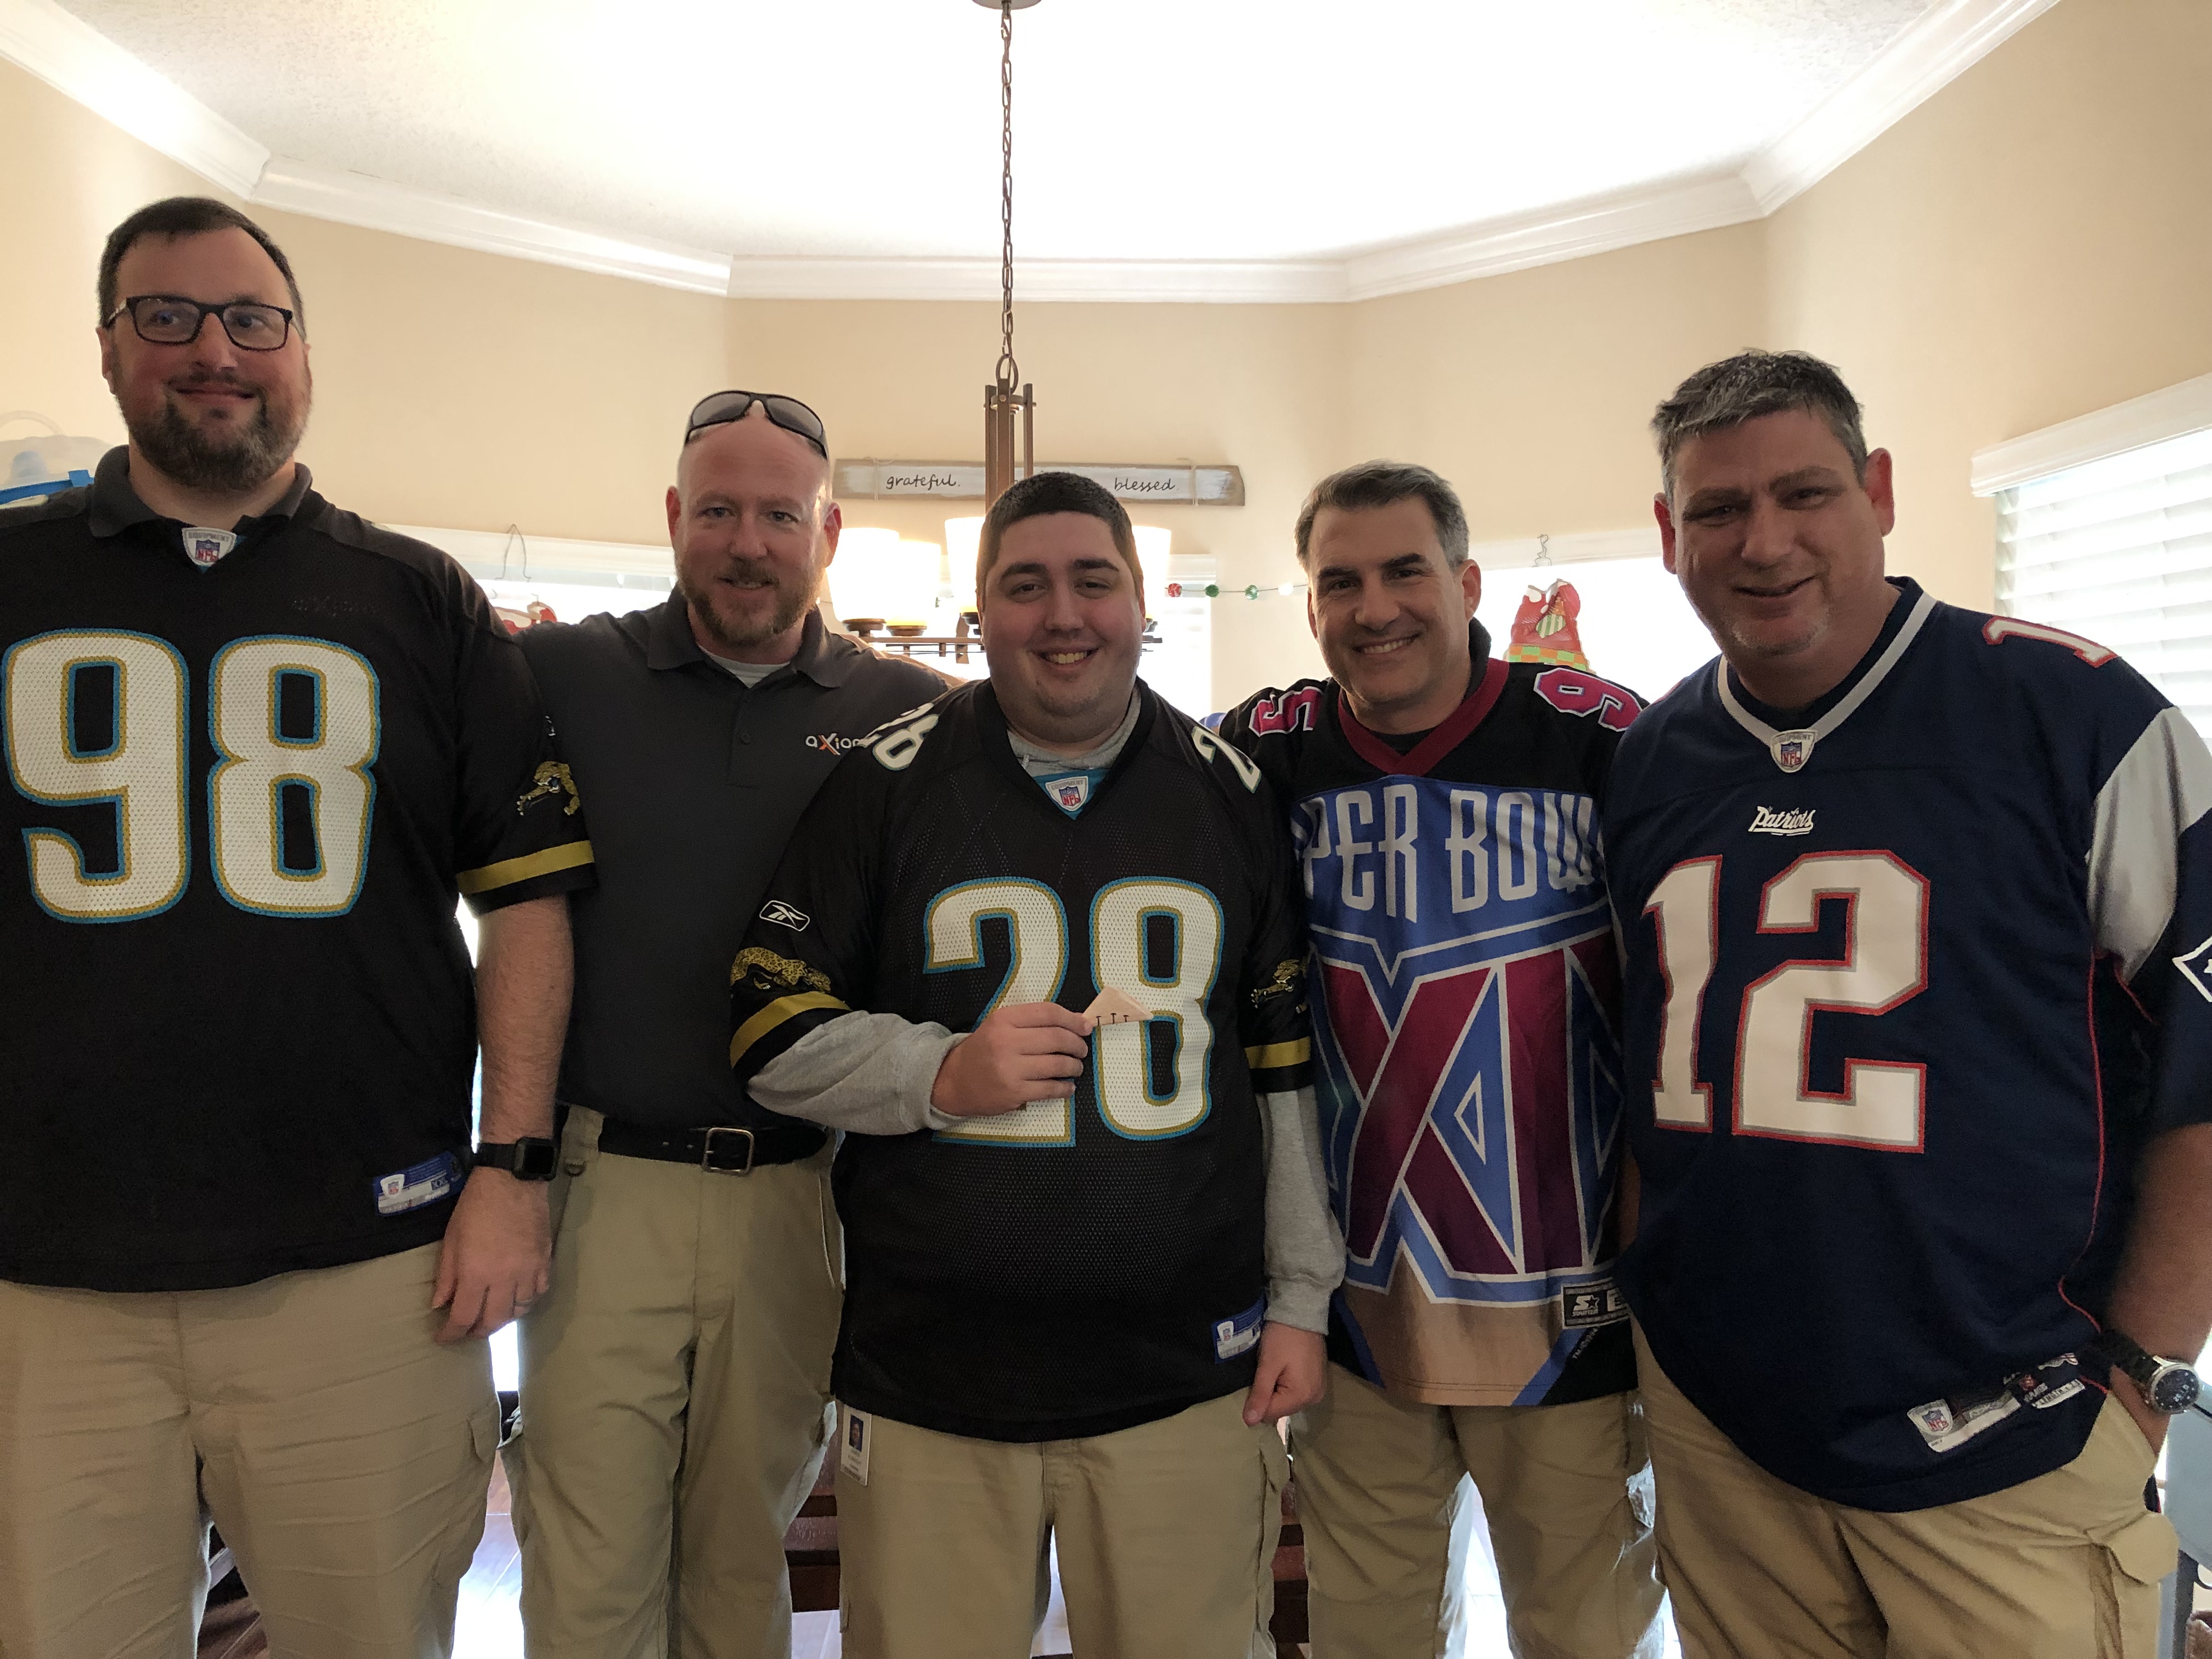 jersey day at work